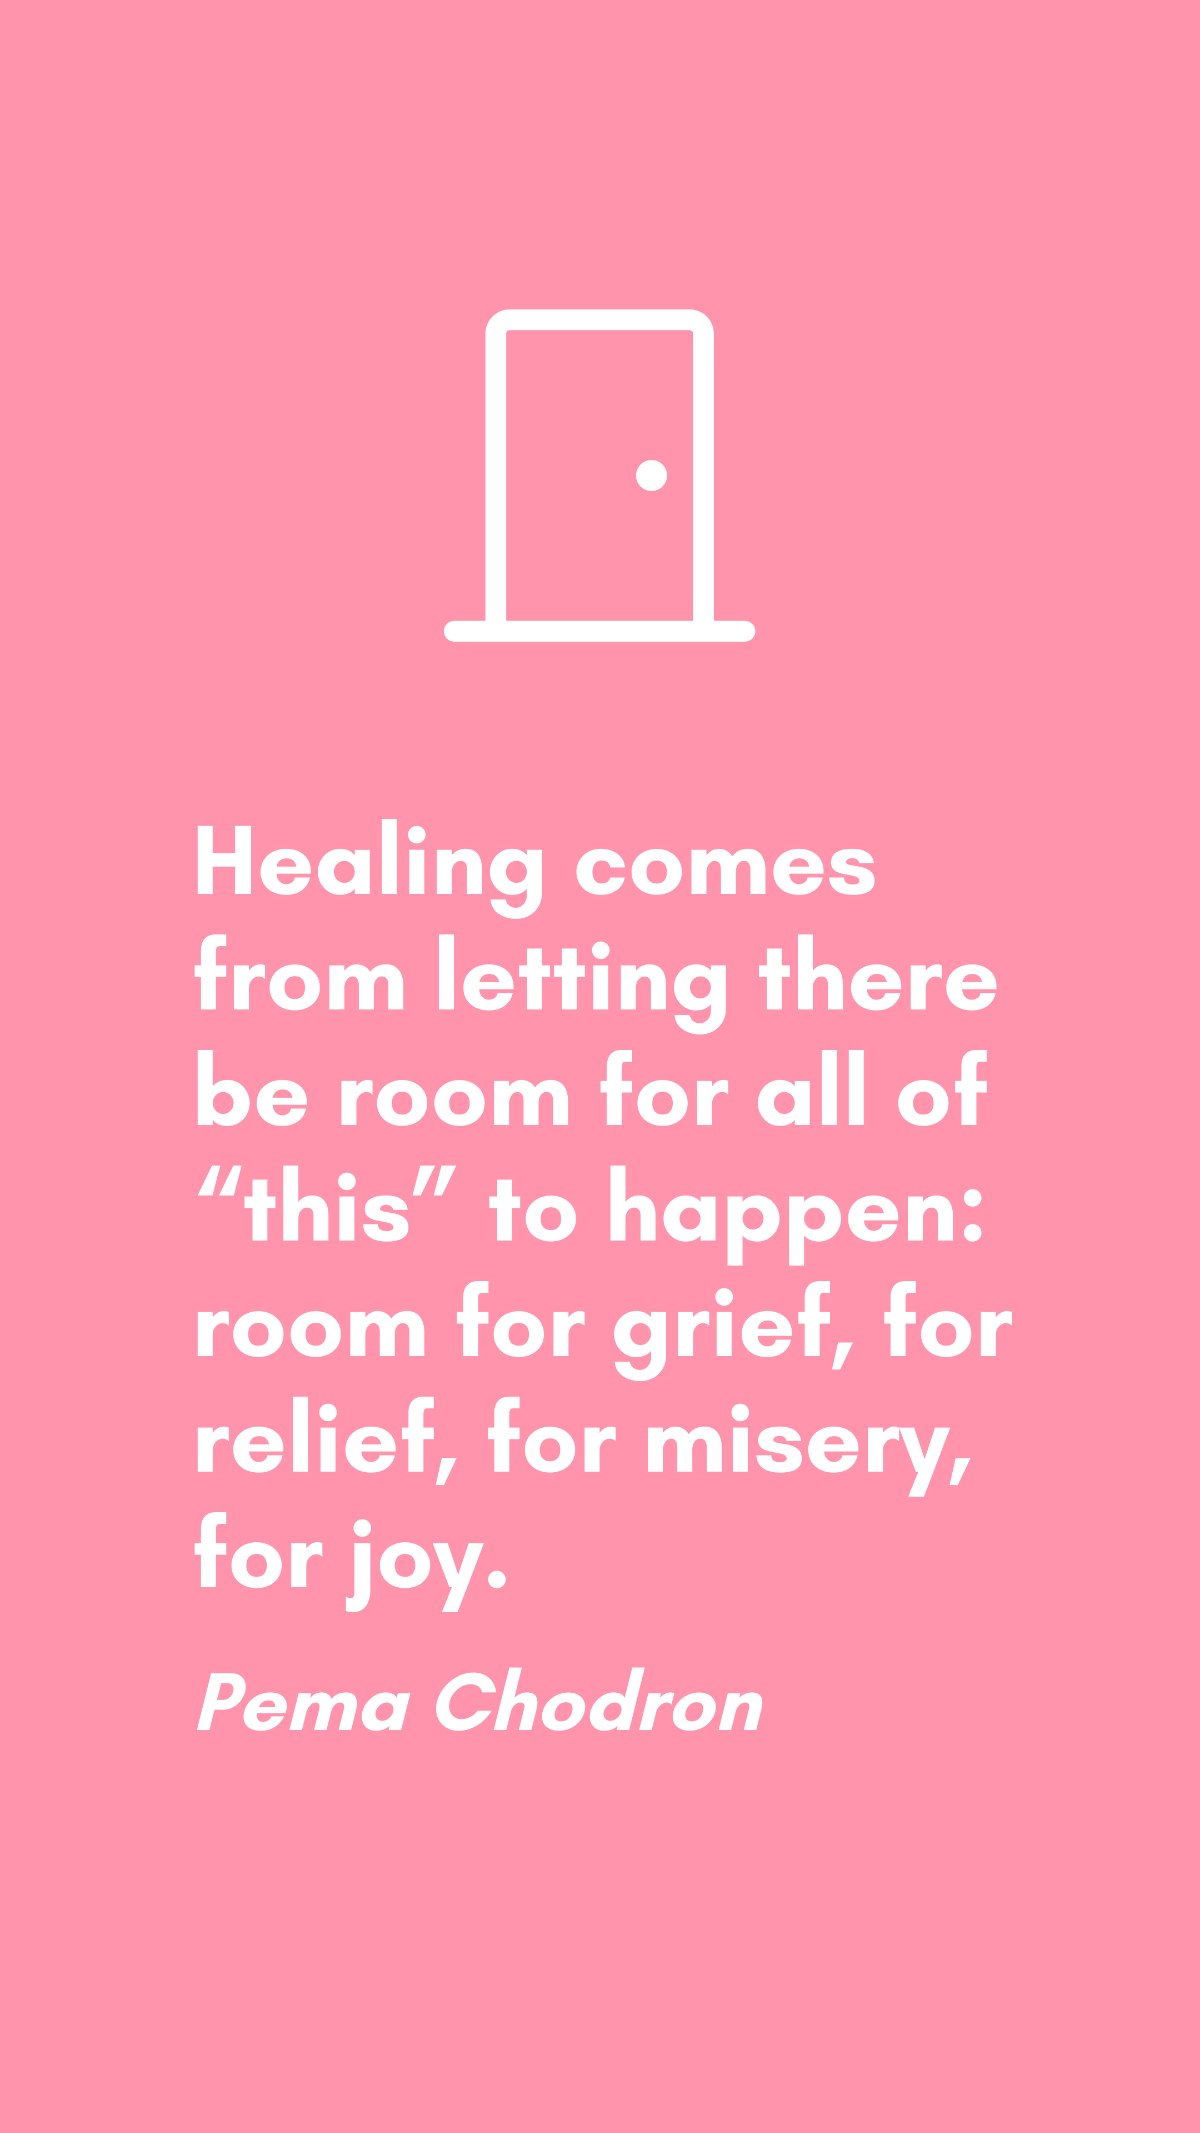 Pema Chodron - Healing comes from letting there be room for all of “this” to happen: room for grief, for relief, for misery, for joy.